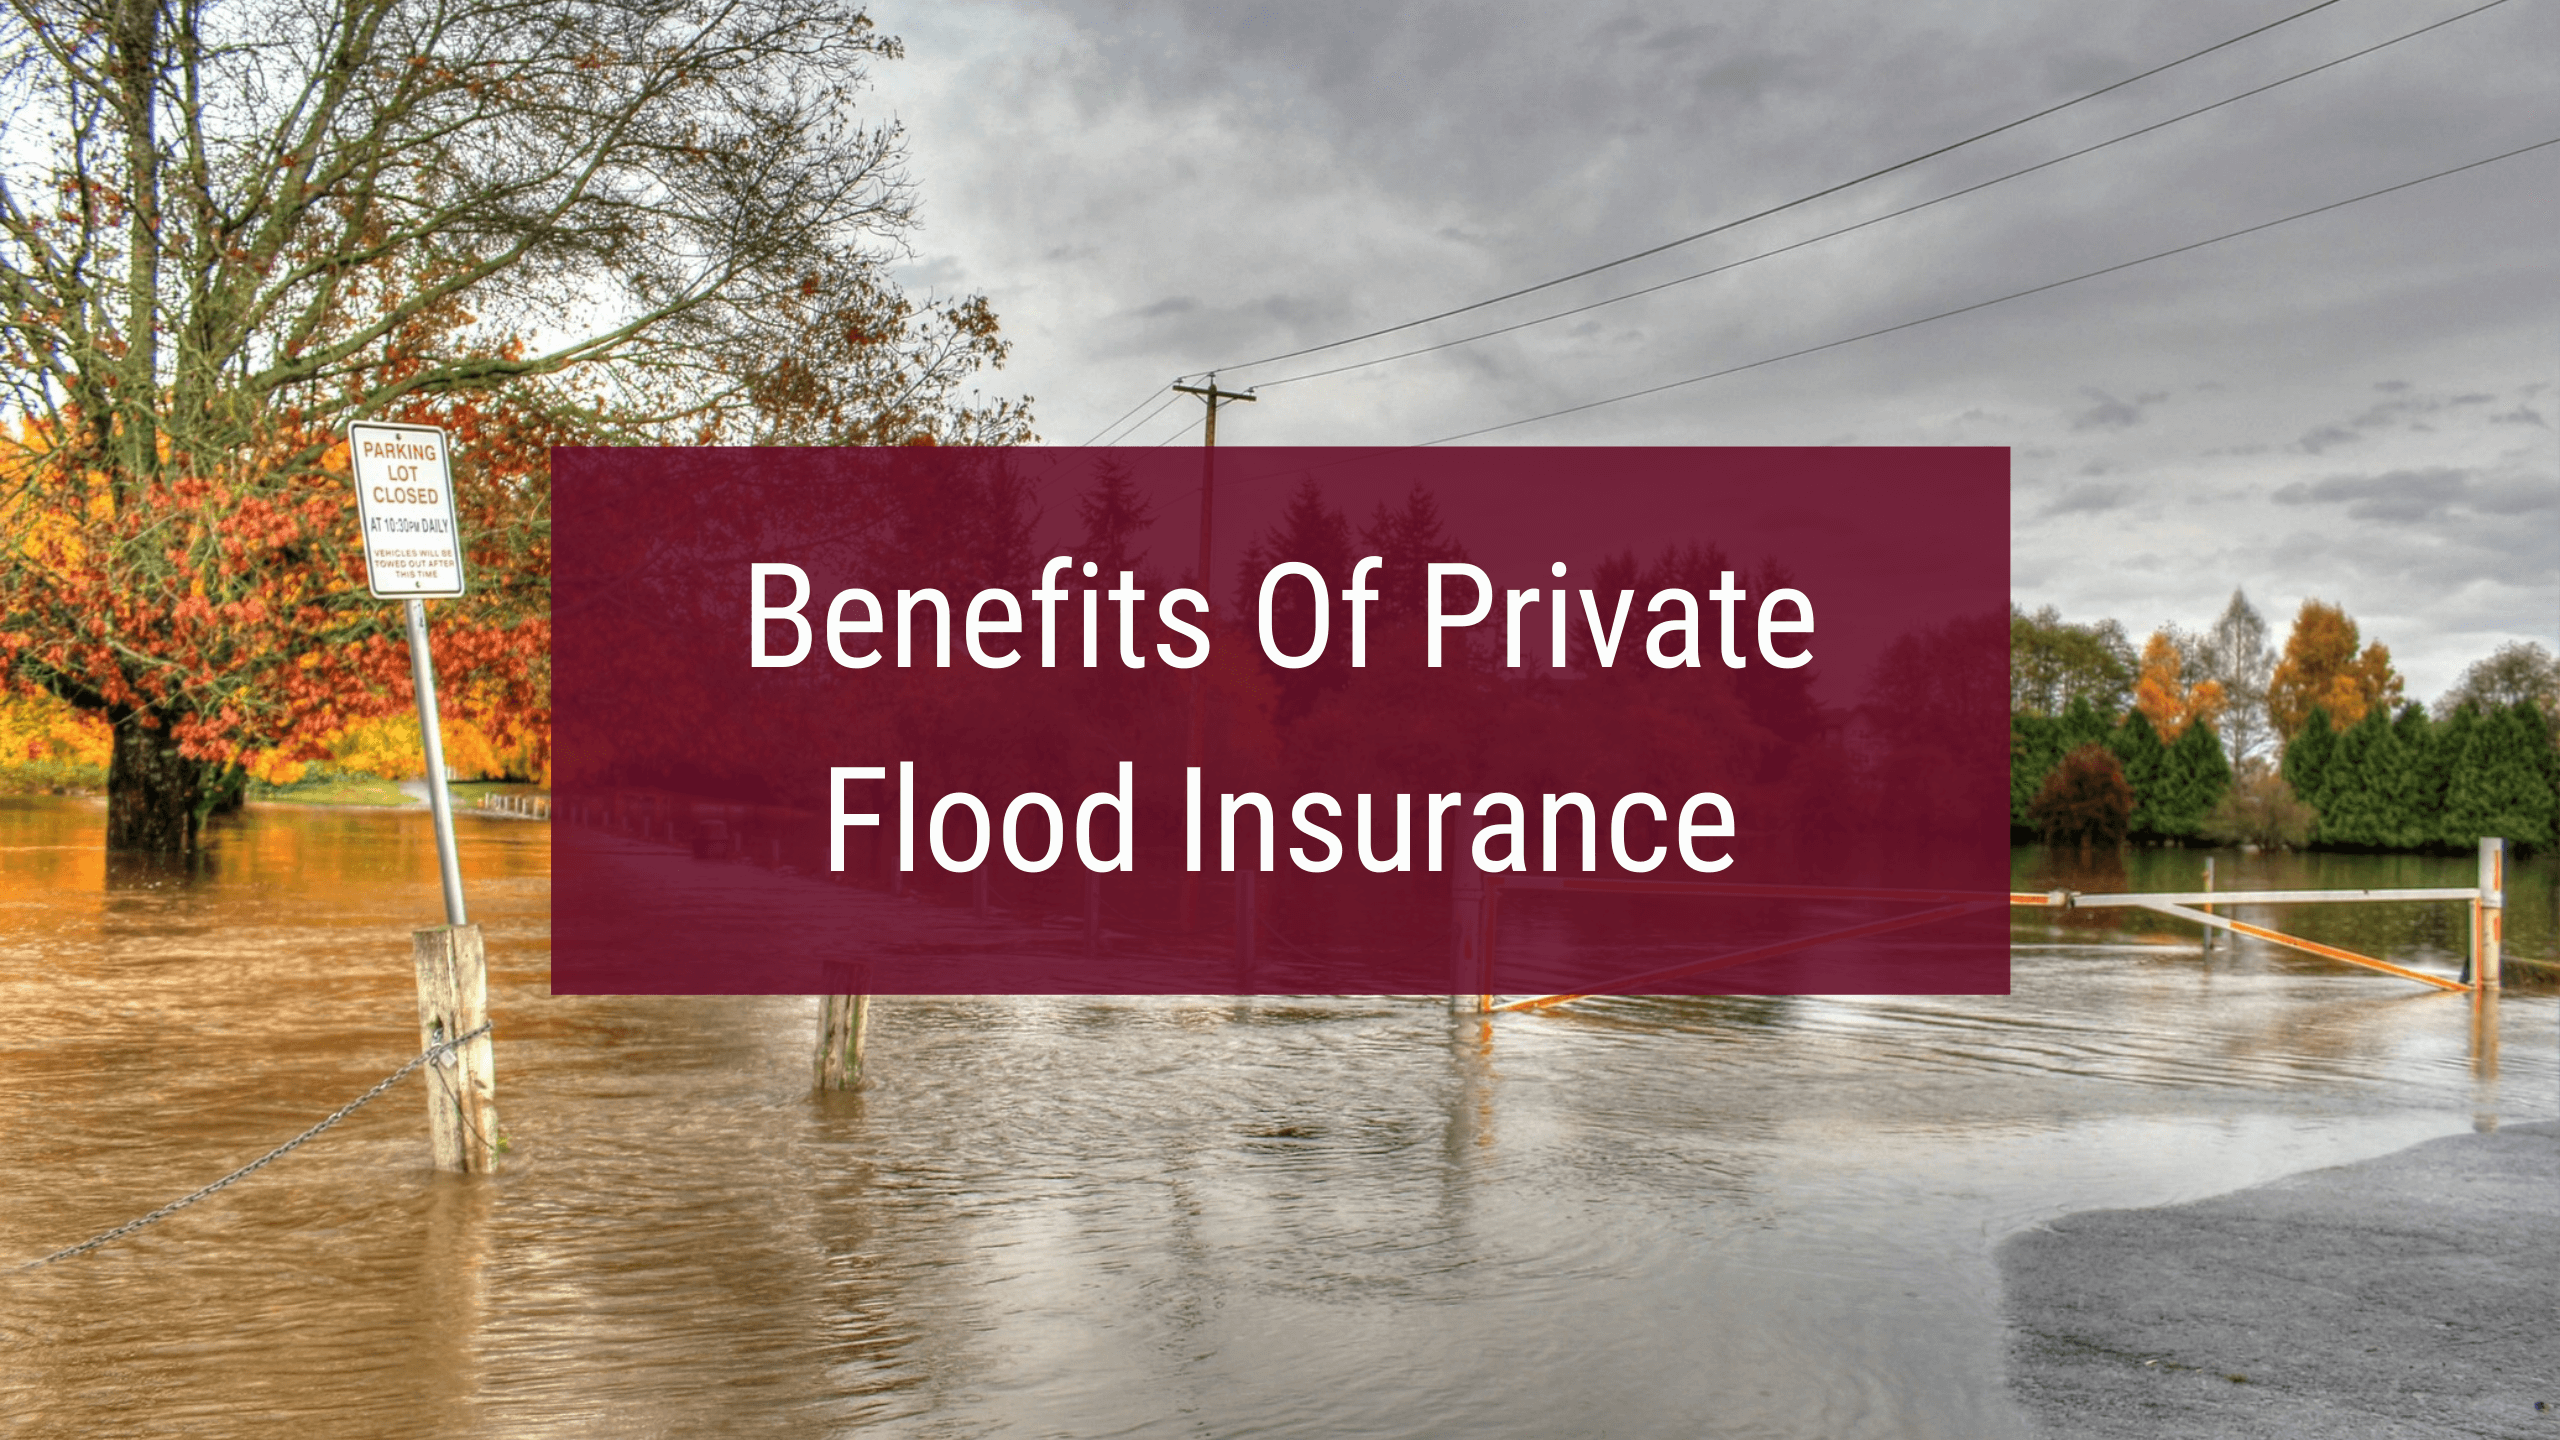 Benefits of private flood insurance in Pennsylvania.